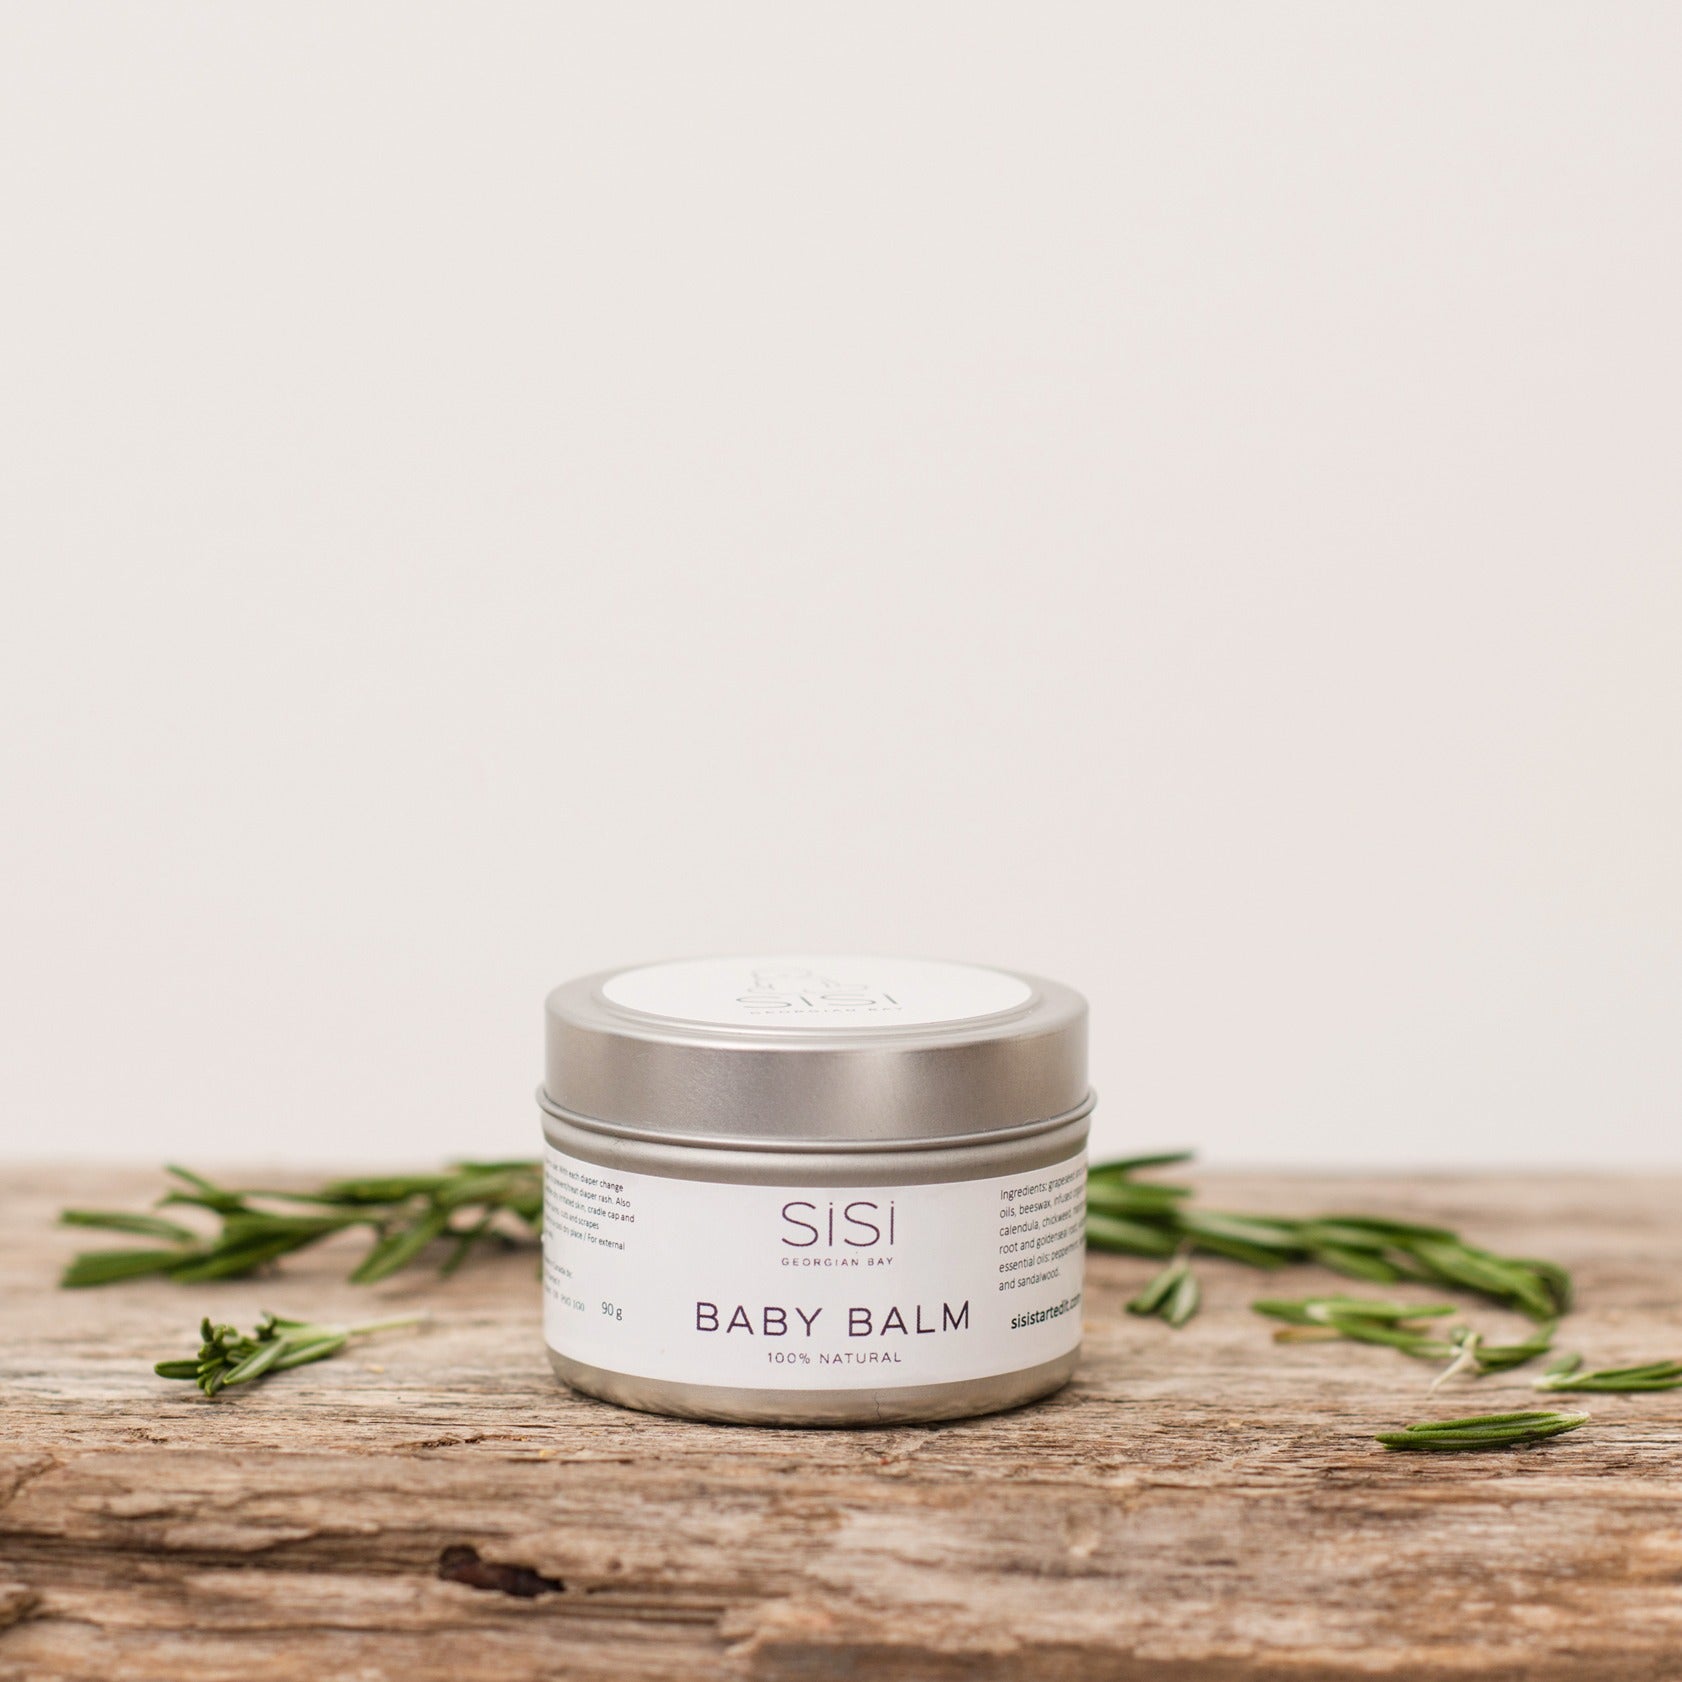 Natural skincare products A 4oz tin of Baby Balm with the lid on and a SiSi Georgian Bay label with the logo and Baby Balm text on a wooden counter with green leaves sprinkled around it